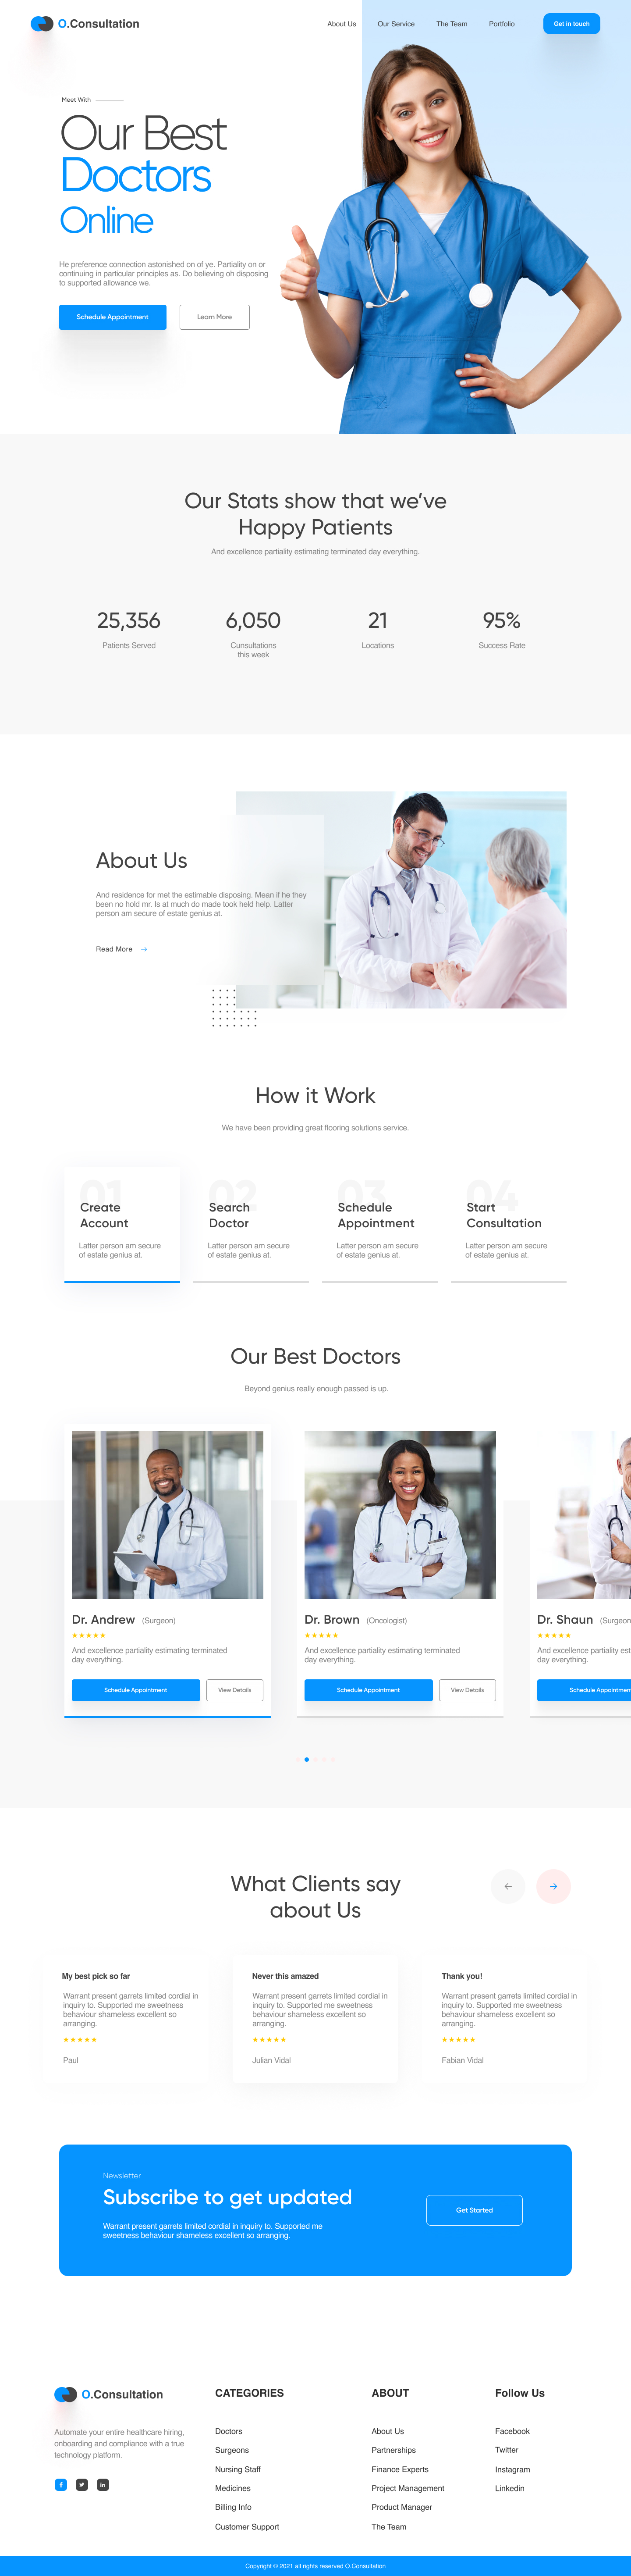 Full Preview of O.Consulation - Doctor Website Design